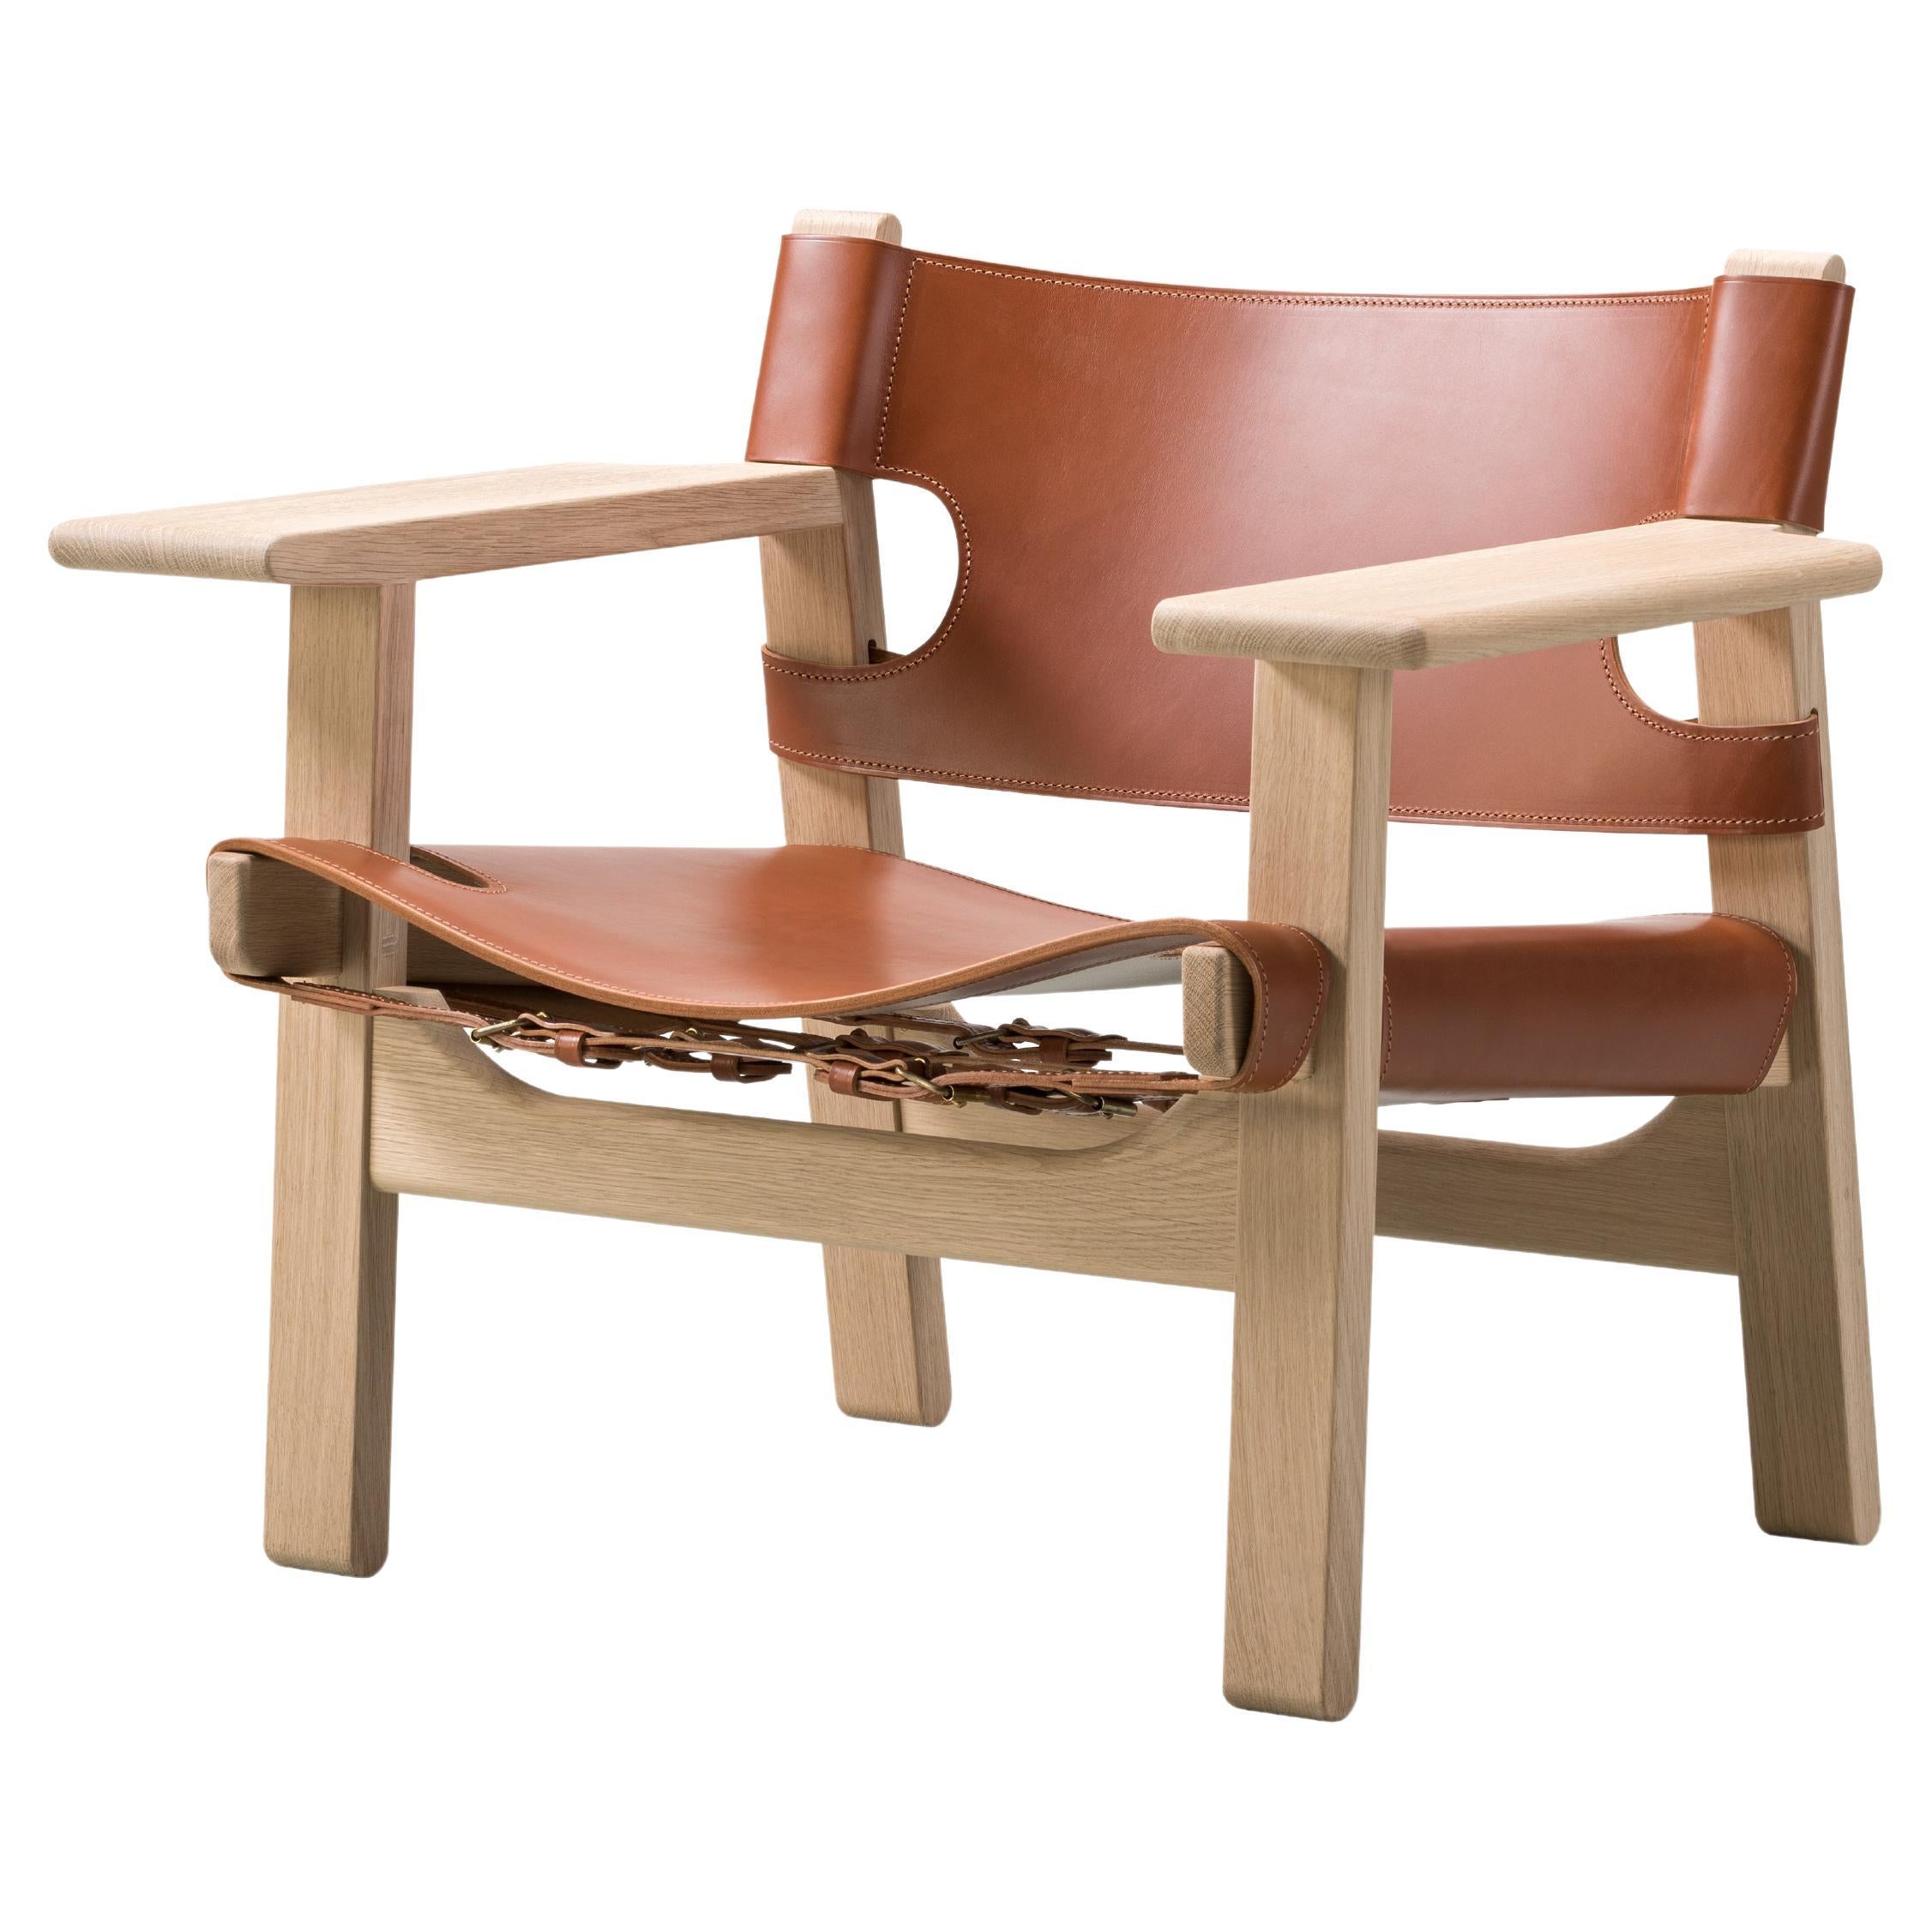 The Spanish Chair in Cognac Leather/Soaped Oak by Børge Mogensen for Fredericia